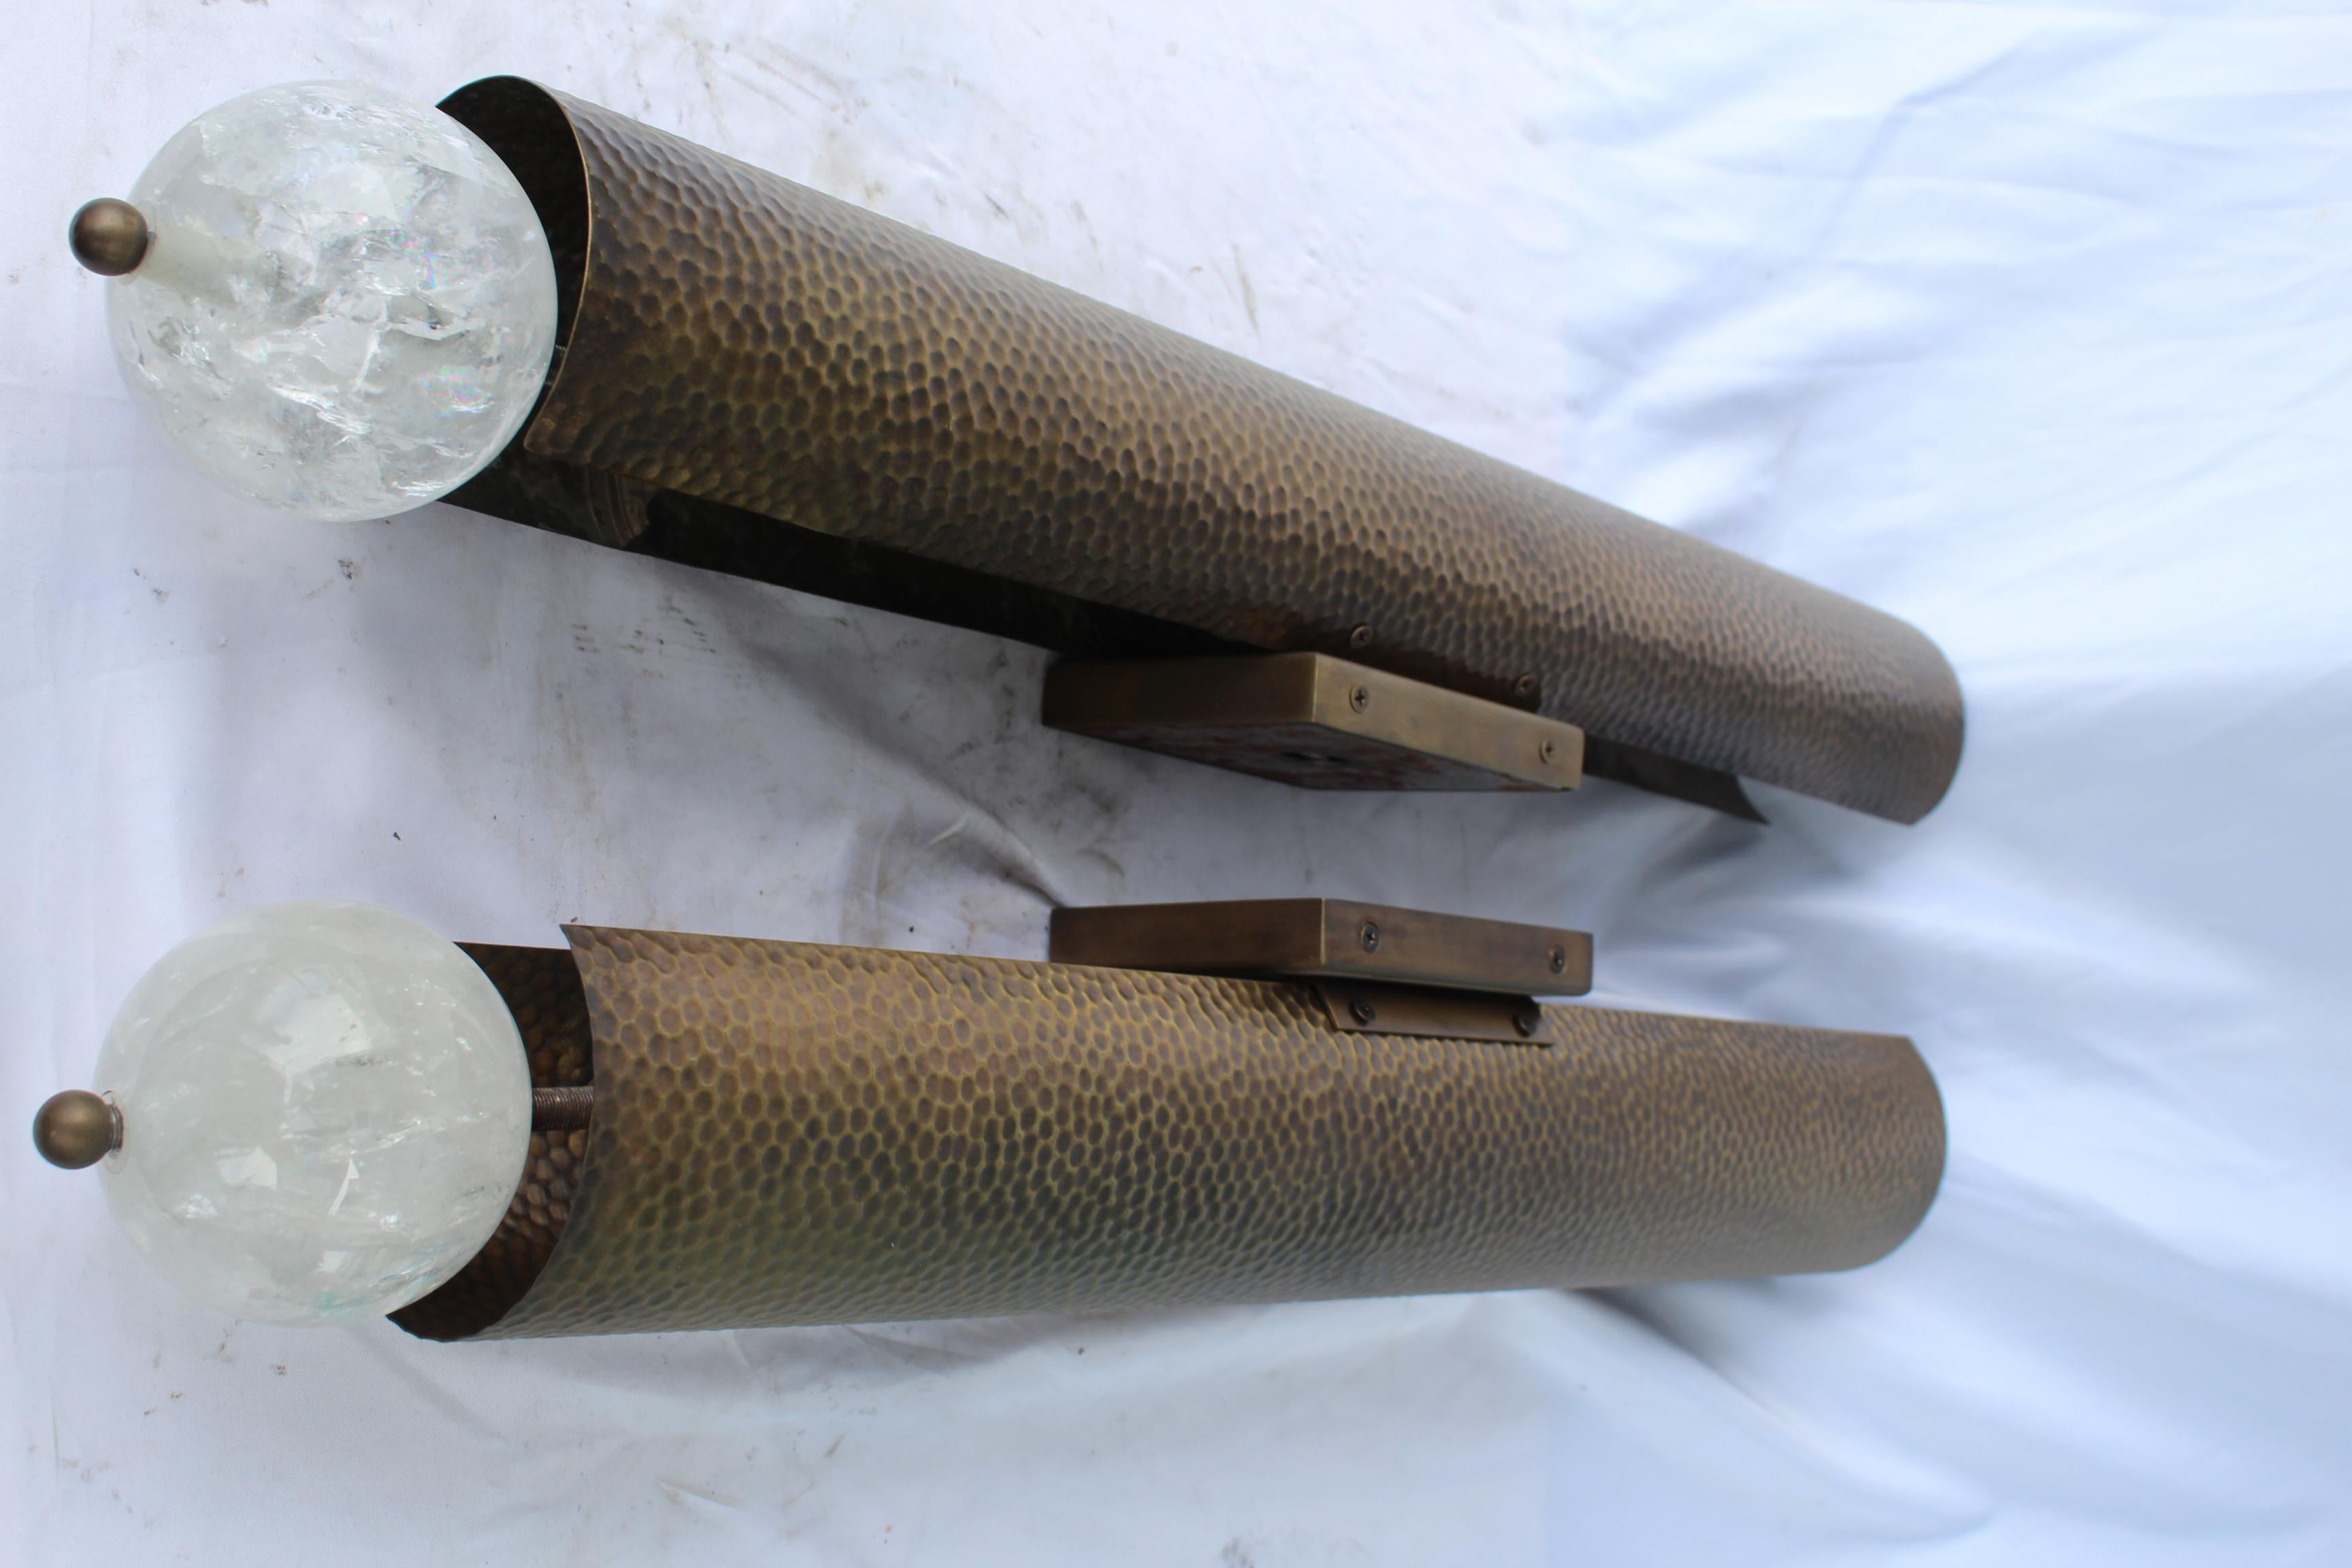 Good size pair of sconces custom made of hammered brass with antique brass patina finish. Has 3